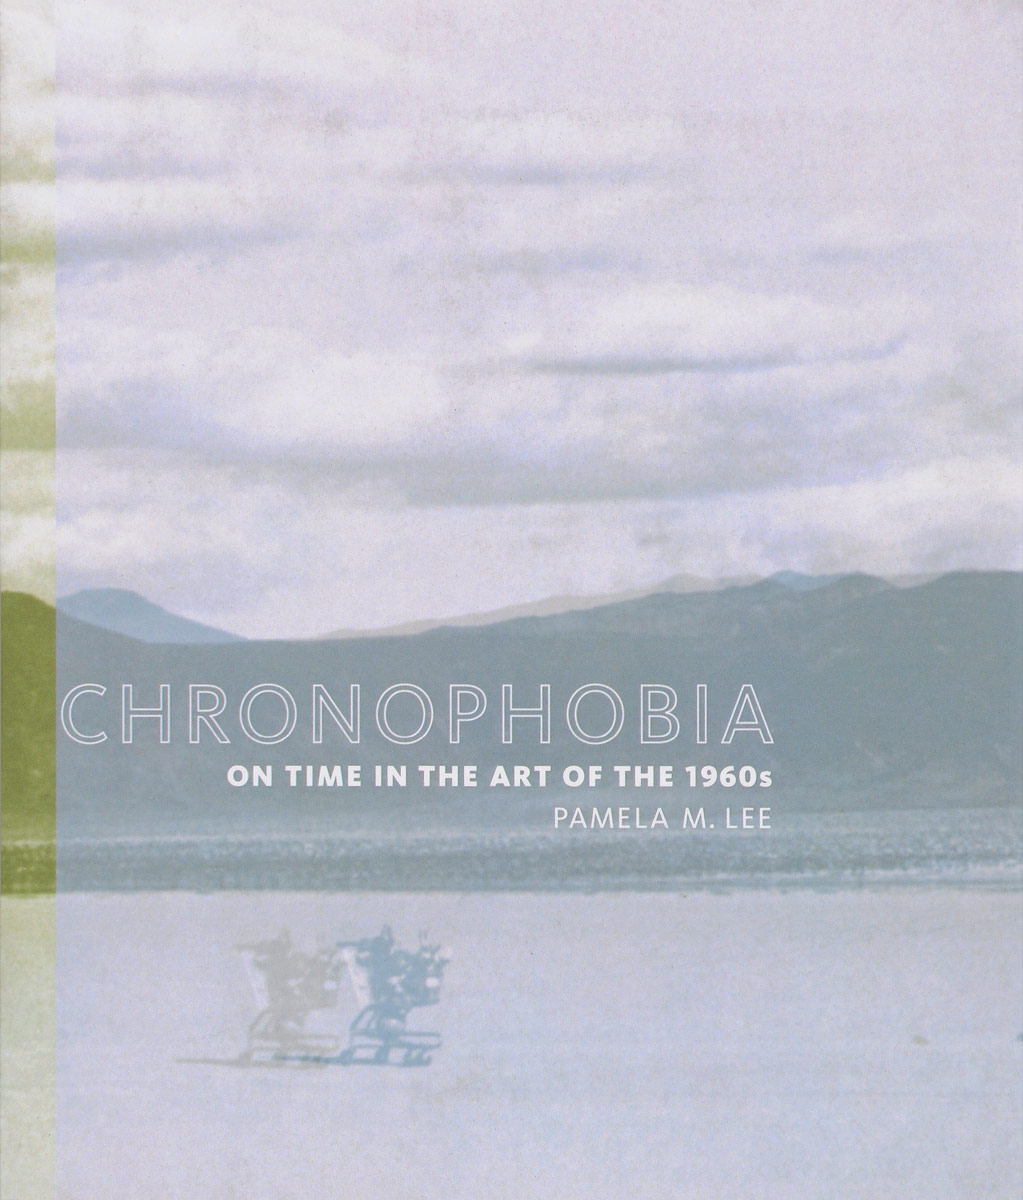 Chronophobia – On Time in the Art of the 1960s